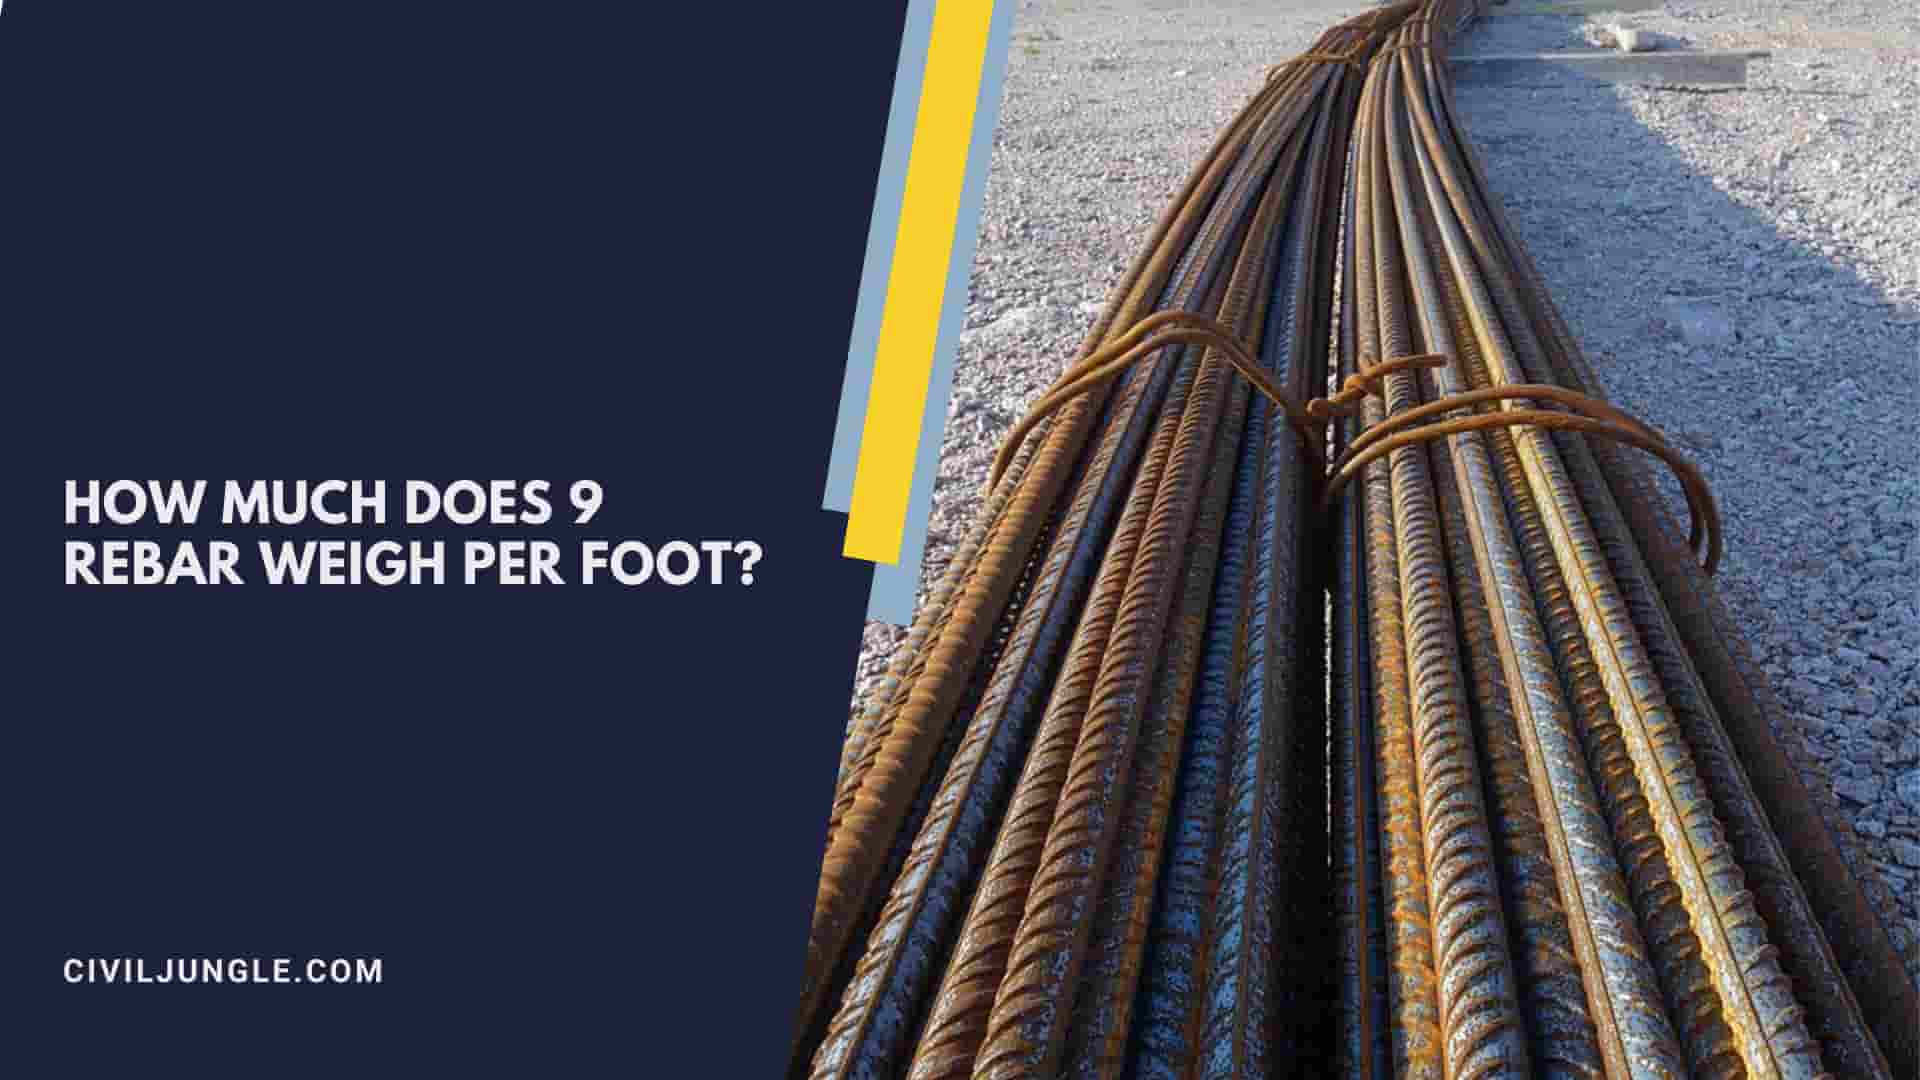 How Much Does 9 Rebar Weigh Per Foot?